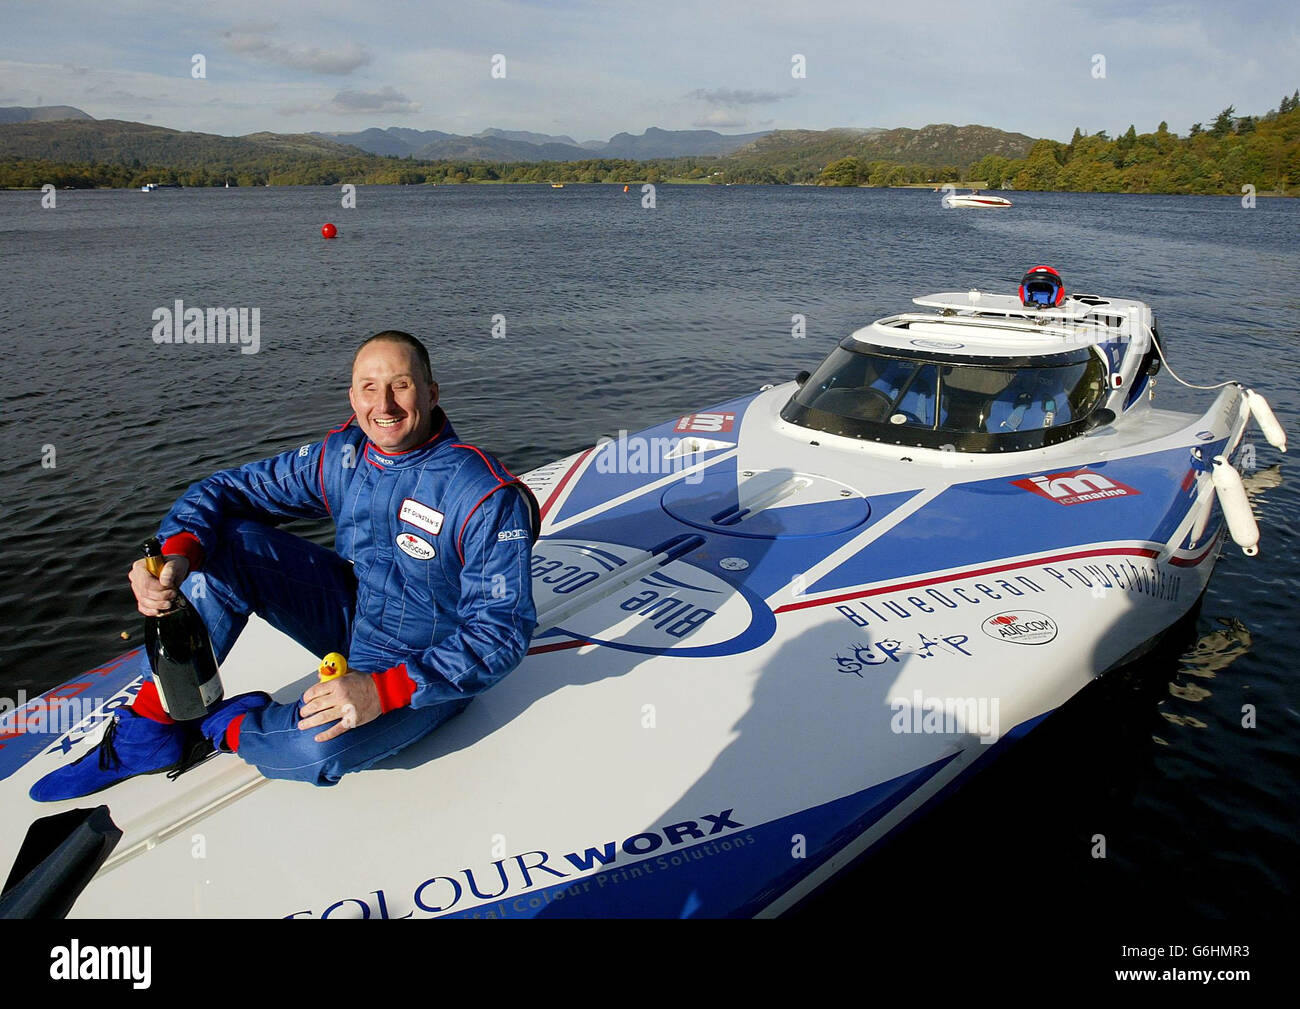 Former soldier Mark Threadgold celebrates after becoming the fastest blind man on water, on Lake Windermere, Cumbria. Threadgold broke the former record of 73mph in a test run on Lake Windermere yesterday. And today, the 36-year-old improved the mark again in two runs on the lake, setting a new world blind water speed record of 91.66mph. As he brought the 35ft Blue Ice powerboat back to shore, the former sergeant in the Royal Corps of Signals said he felt smashing . Stock Photo